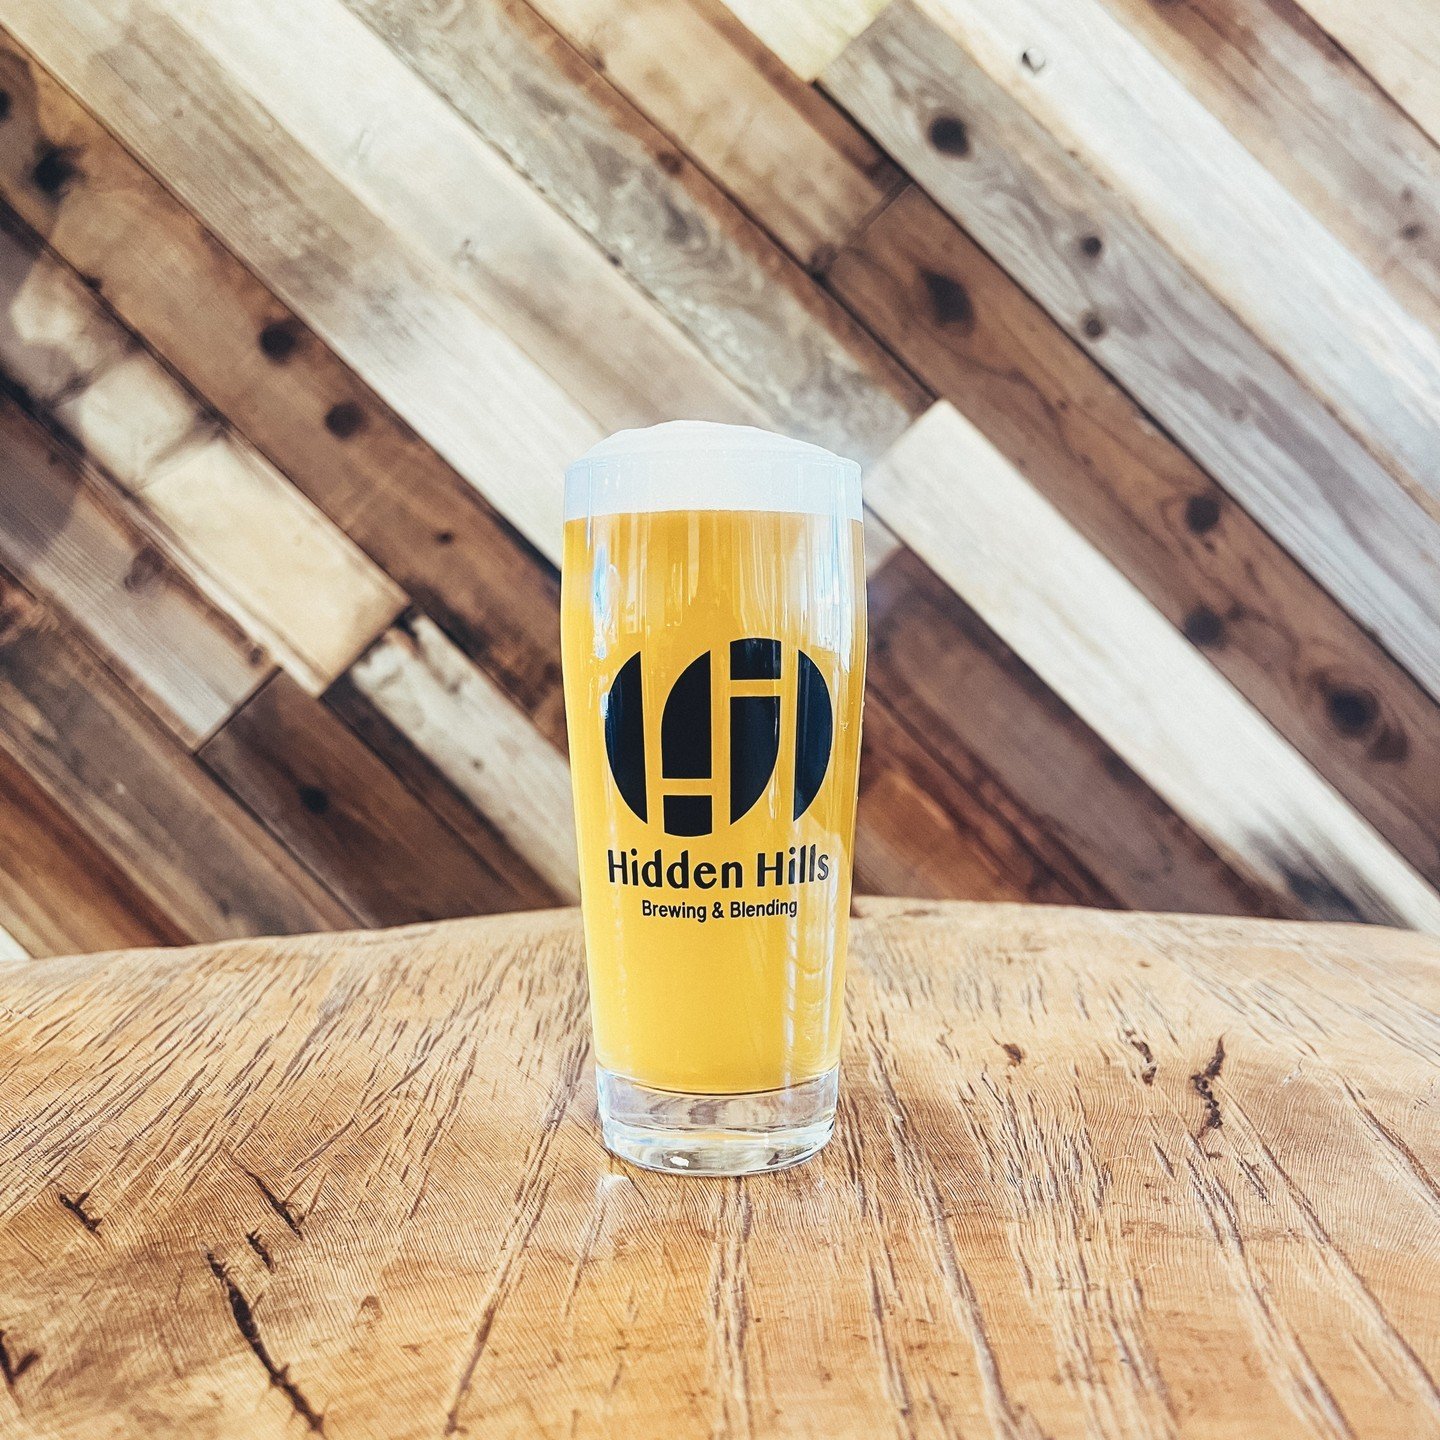 Don&rsquo;t miss out on @HiddenHillsbrewblend&rsquo;s latest taplist. 15 delicious beers are available to taste, including Valleyside Blonde Ale and Daypack Xtra Pale Ale, brewed by award-winning local brewer Jeffrey Vitalich.

🍺 Valleyside - CA Blo